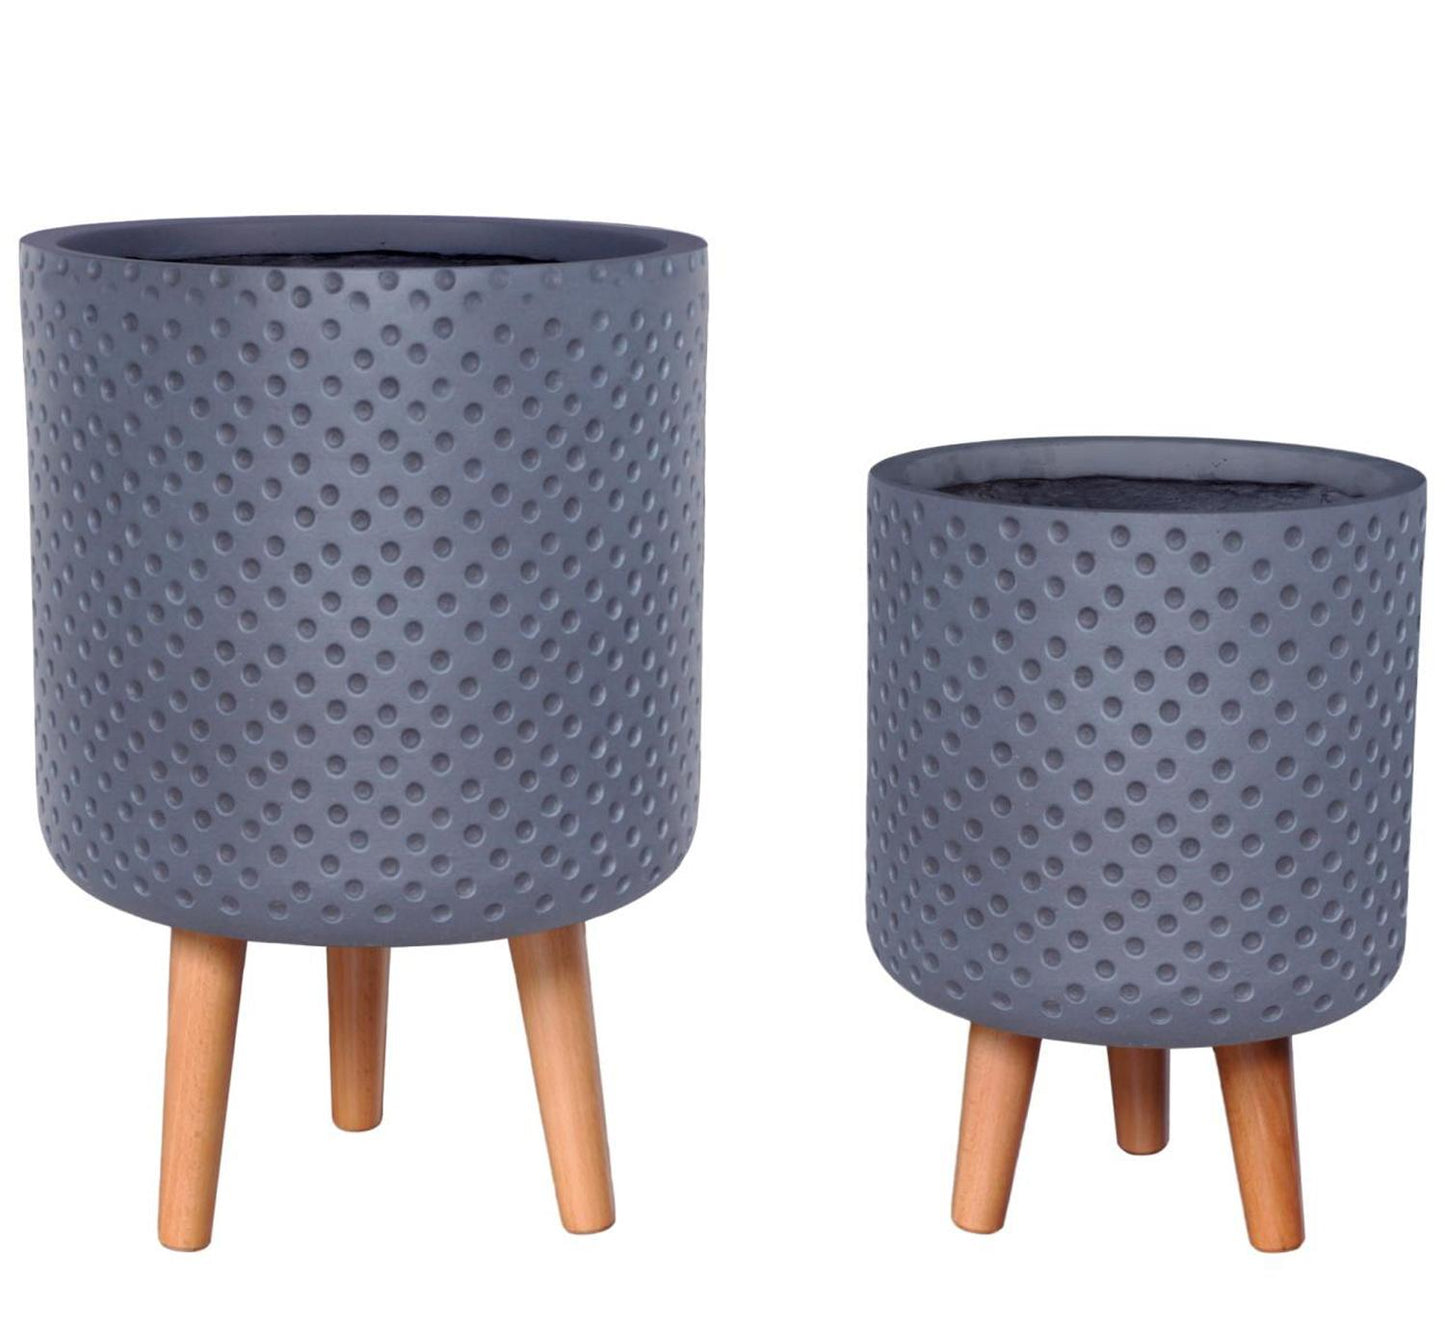 Dotted Style Grey Cylinder Indoor Planter on Legs by Idealist Lite D24.5 H35 cm, 10L - citiplants.com